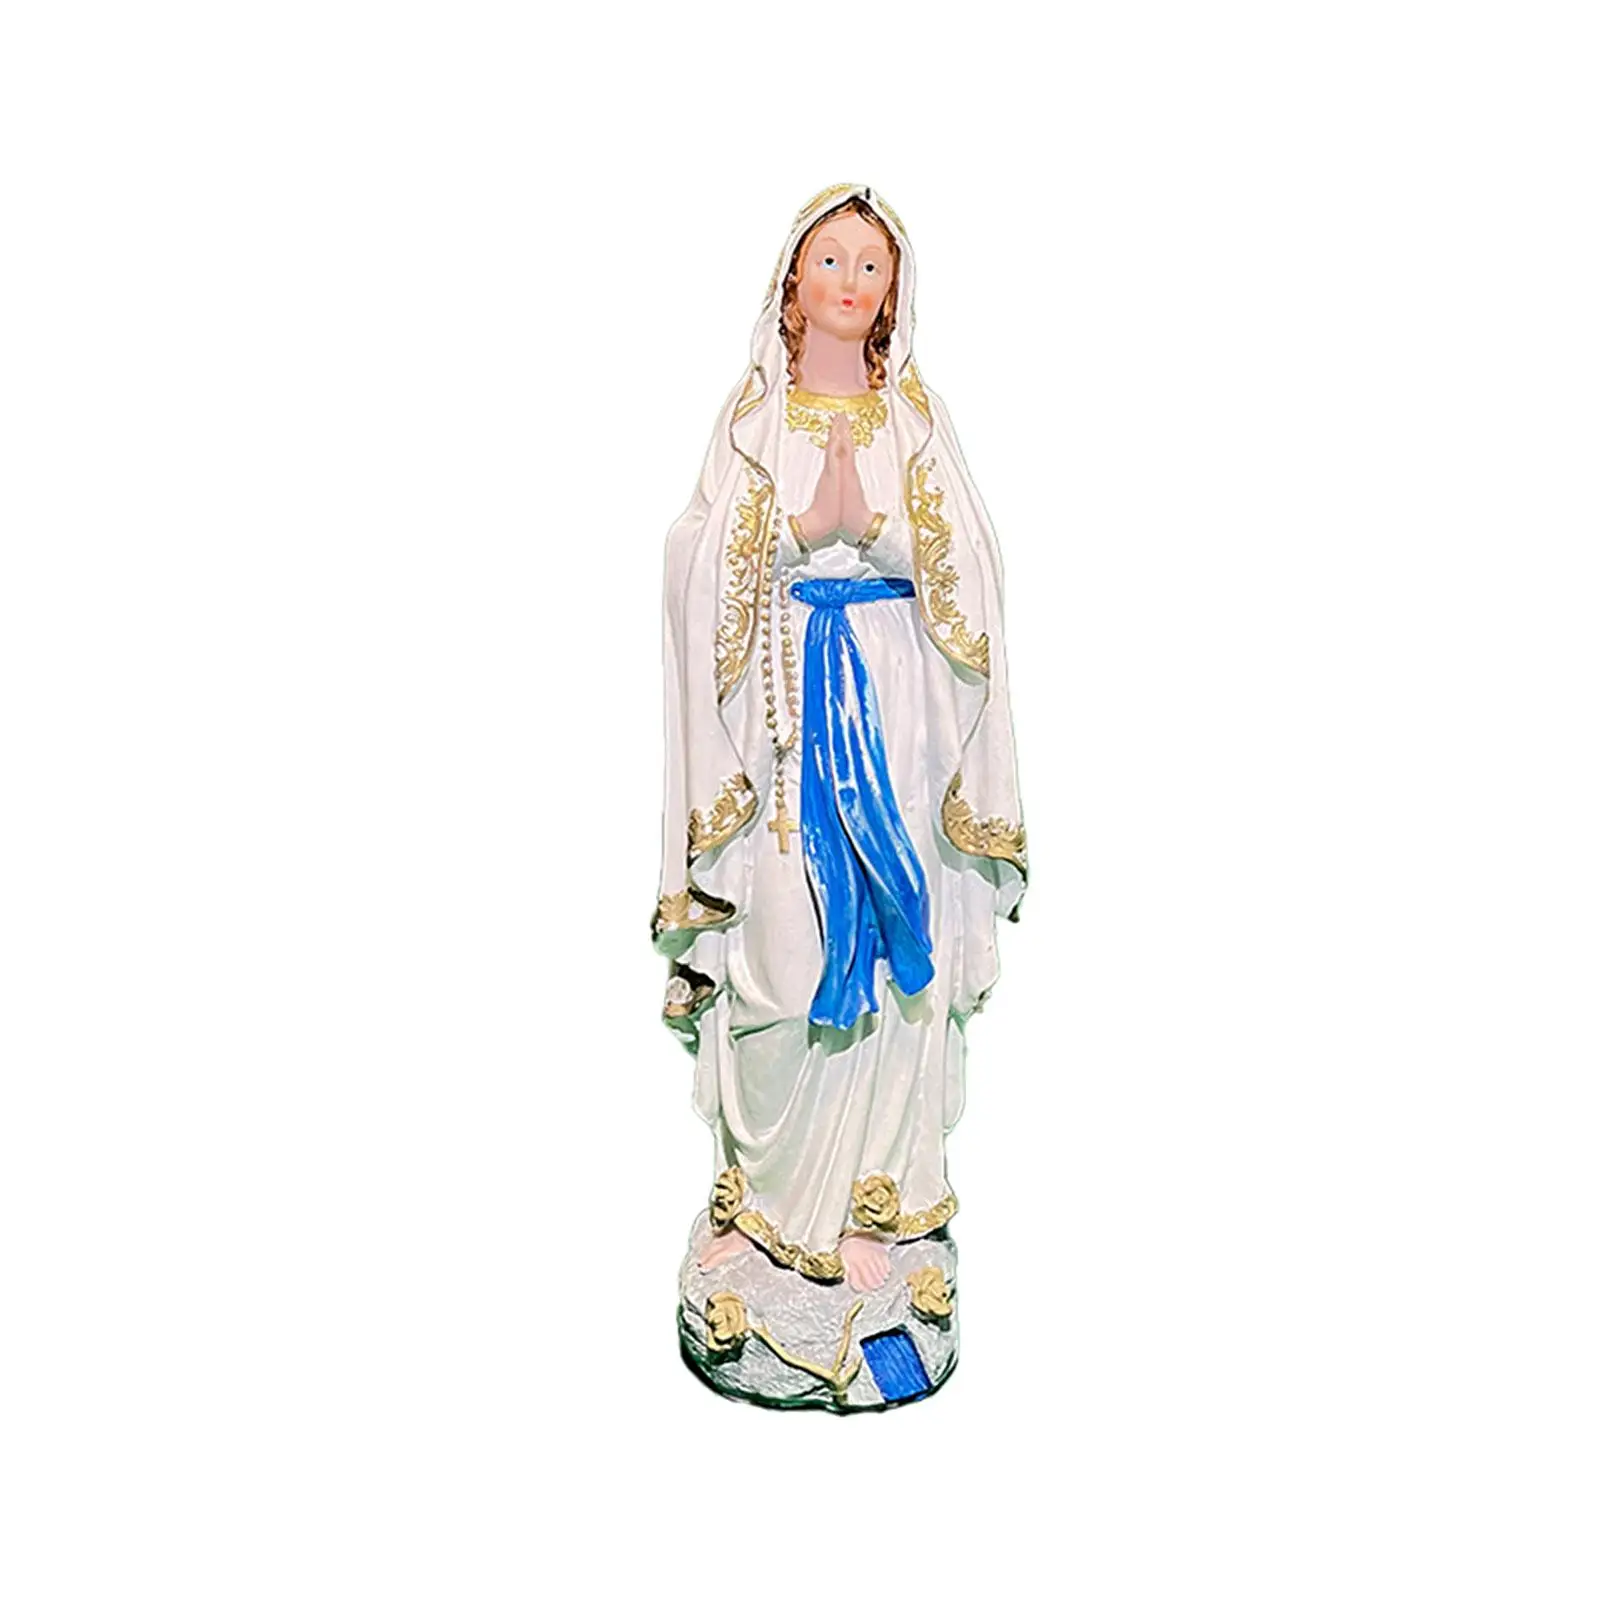 Mary Figurine Worship Handpainted Holy Ornament Collection Decoration for Collectibles Tabletop Home Accent Gift 11.81inch.